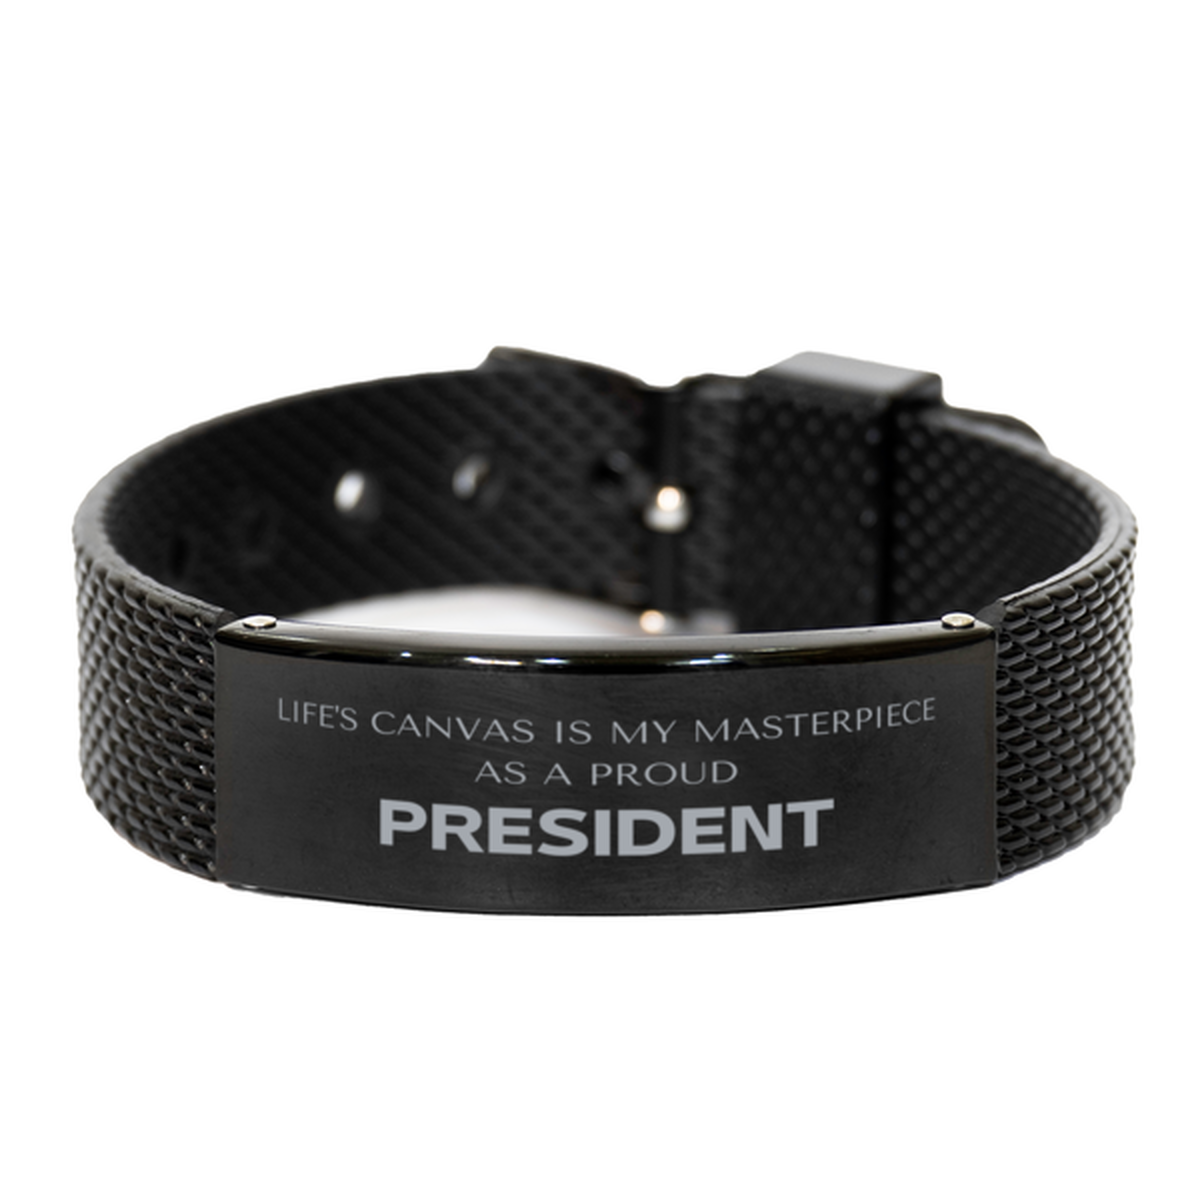 Proud President Gifts, Life's canvas is my masterpiece, Epic Birthday Christmas Unique Black Shark Mesh Bracelet For President, Coworkers, Men, Women, Friends